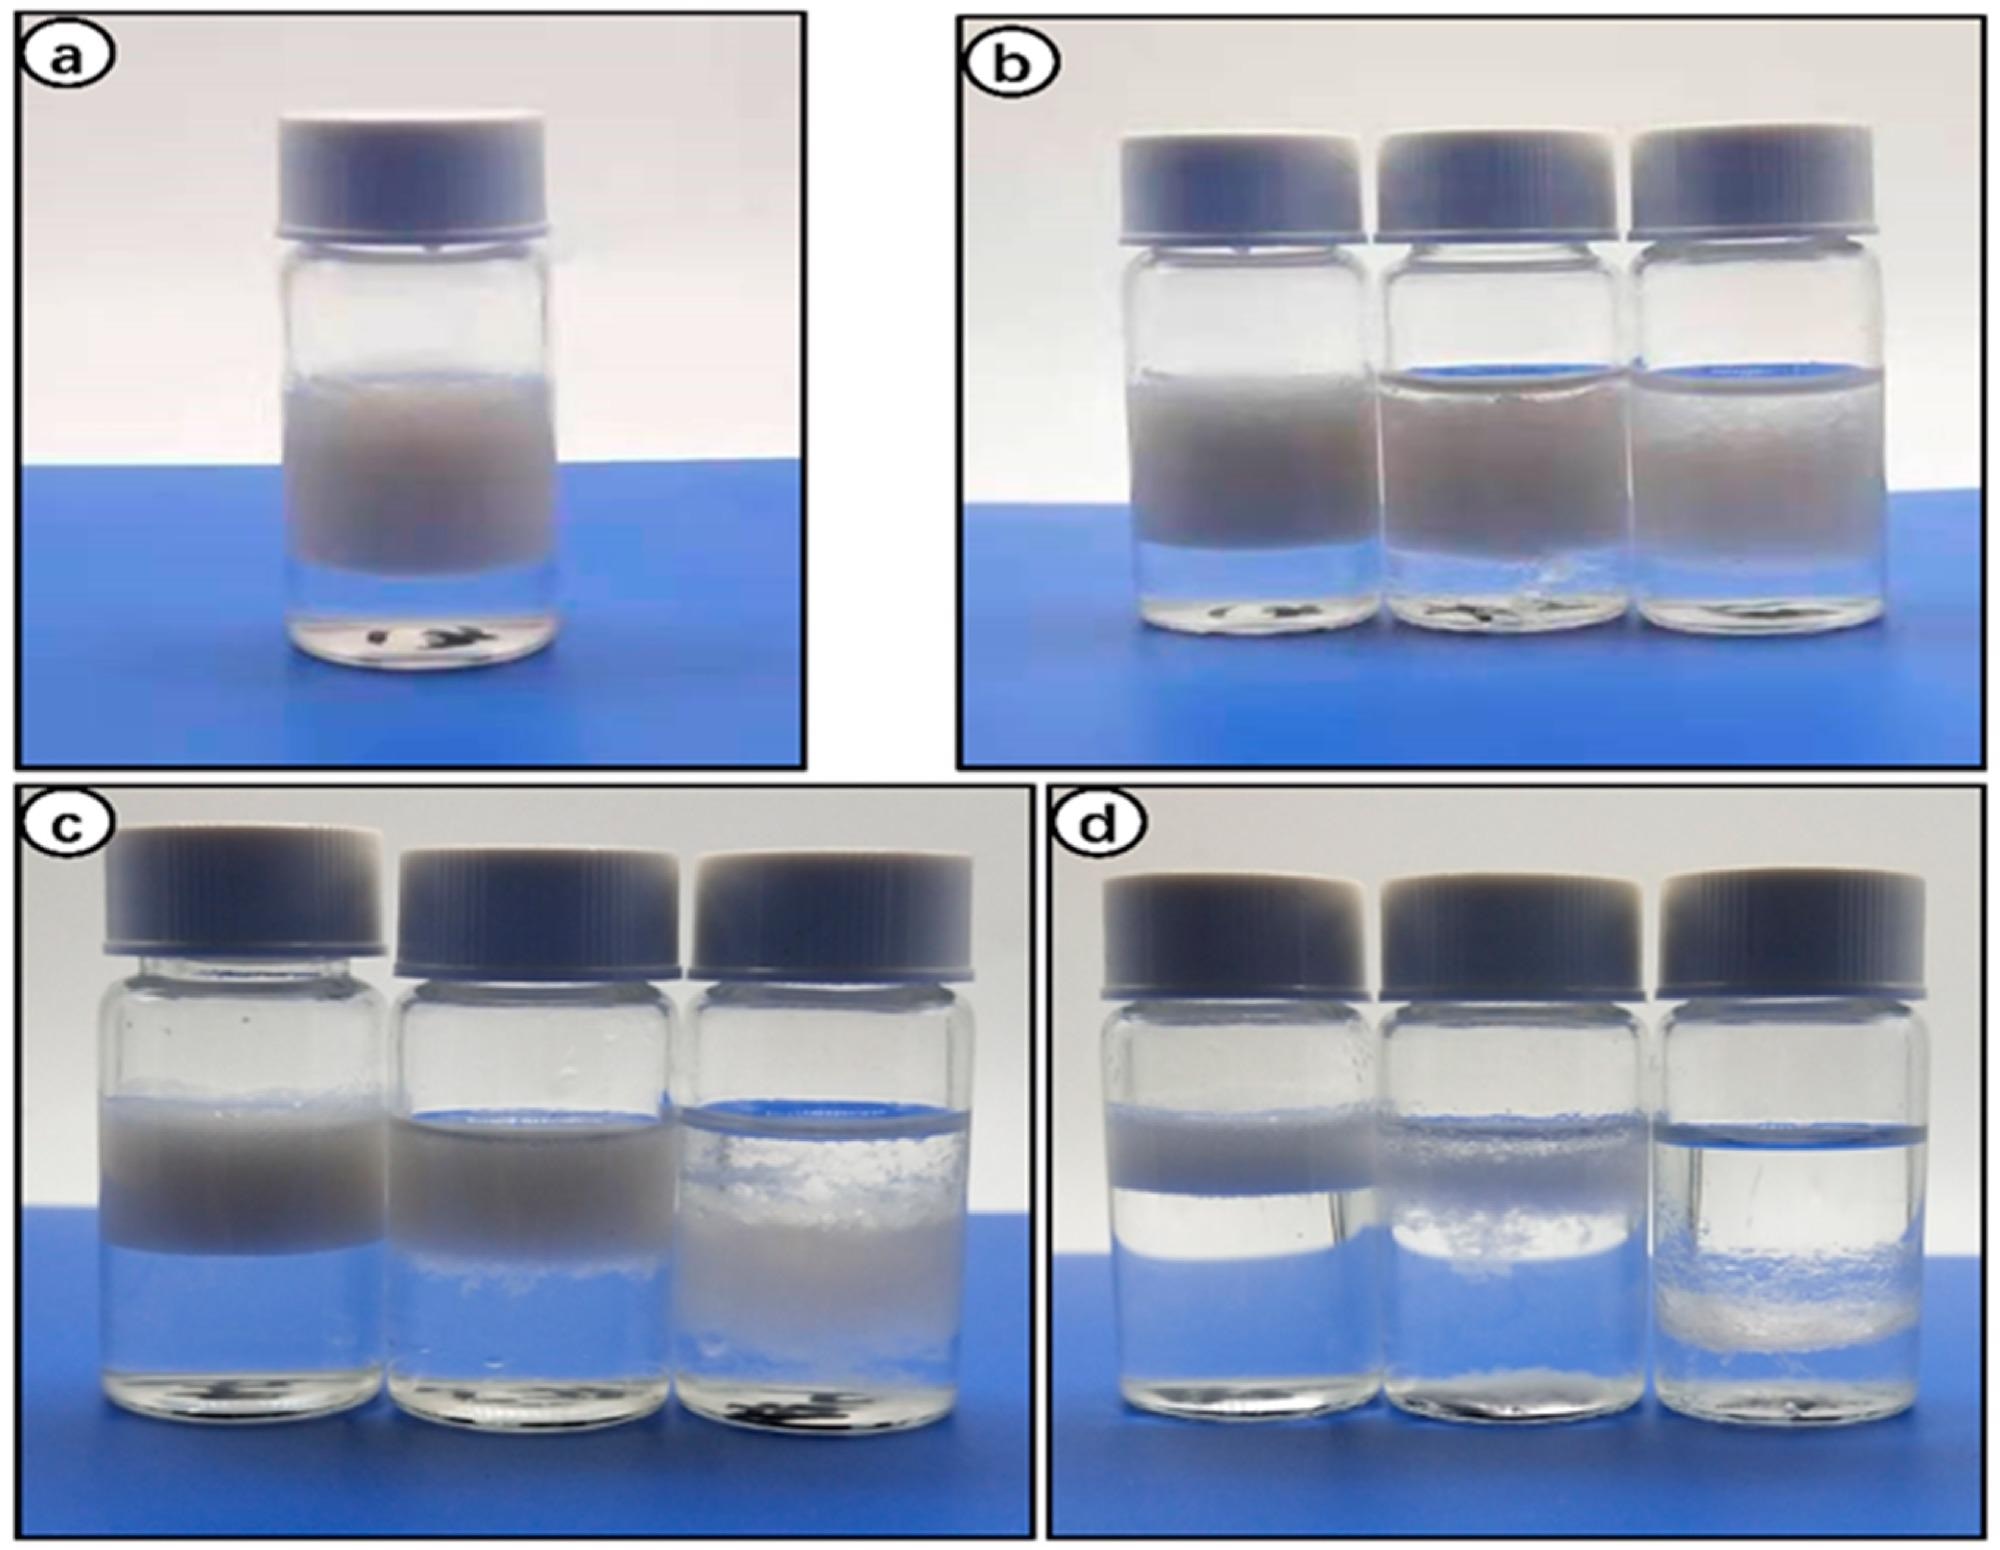 Oil/water Pickering emulsions after dispersing at 10,000 rpm for 3 min: (a) O/W, 1:9; RLCs = 0.5% (oil phase = n-hexadecane, water phase = RLC suspension). (b–d) From left to right, O/W ratio = 1:9, 3:7, 5:5. (b) RLCs = 0.5%; (c) RLCs = 0.3%; (d) RLCs = 0.1%.